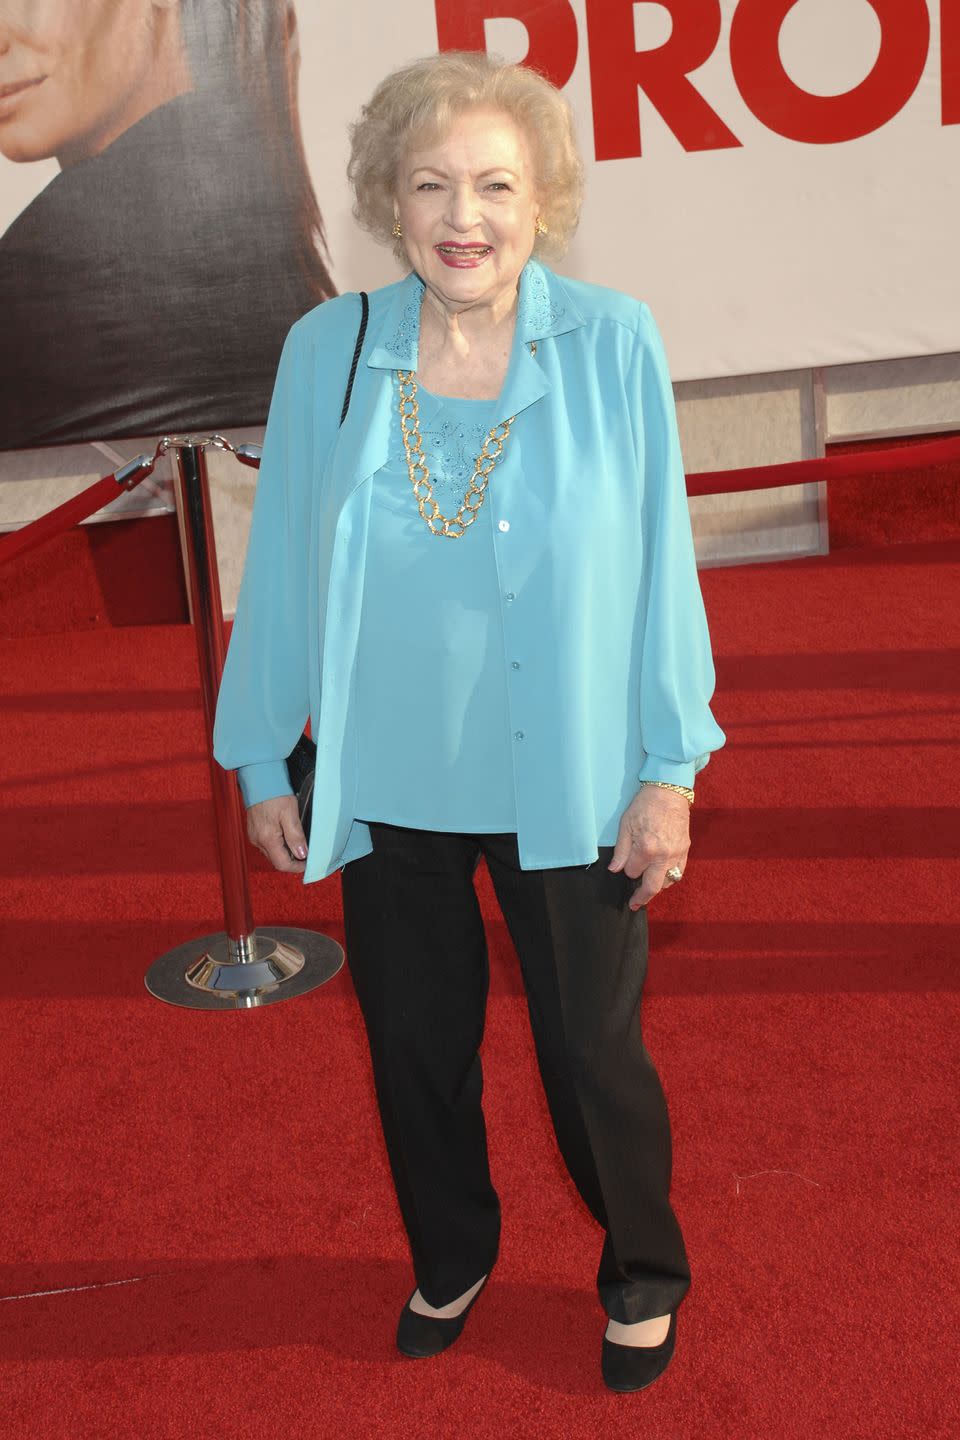 <p>Betty mostly made a name for herself in television throughout her career. However, in the late 2000s, she began appearing in film more frequently. From <em>The Proposal</em> to <em>You Again</em>, it wasn't long before a whole new generation became Betty White fans.</p> 